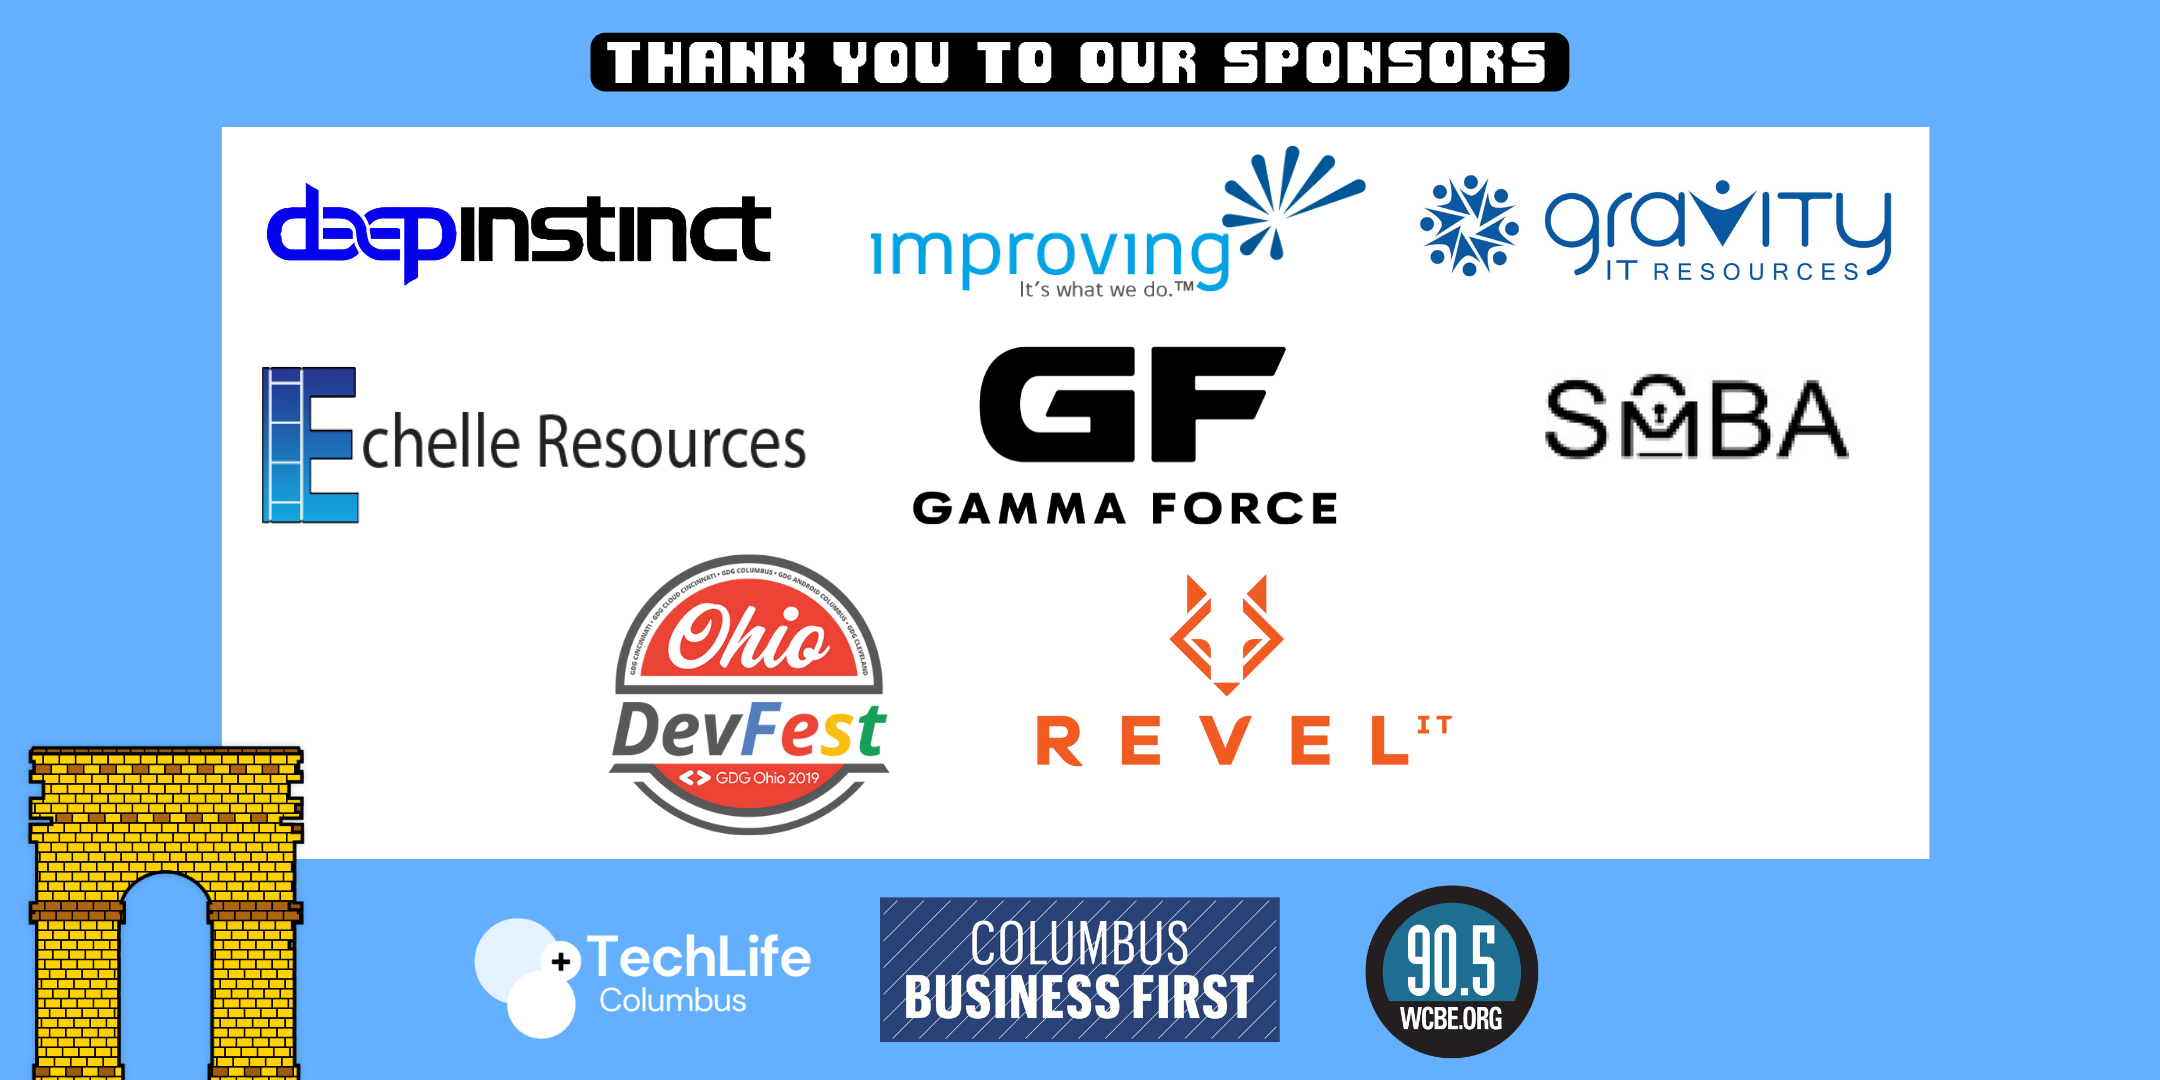 Thank you to our sponsors: Deep Instinct, Improving, Gravity IT Resources, Echelle Resources, Gamma Force, SMBA, Ohio Dev Fest, Revel, TechLife Columbus, Columbus Business First, and 90.5 WCBE.